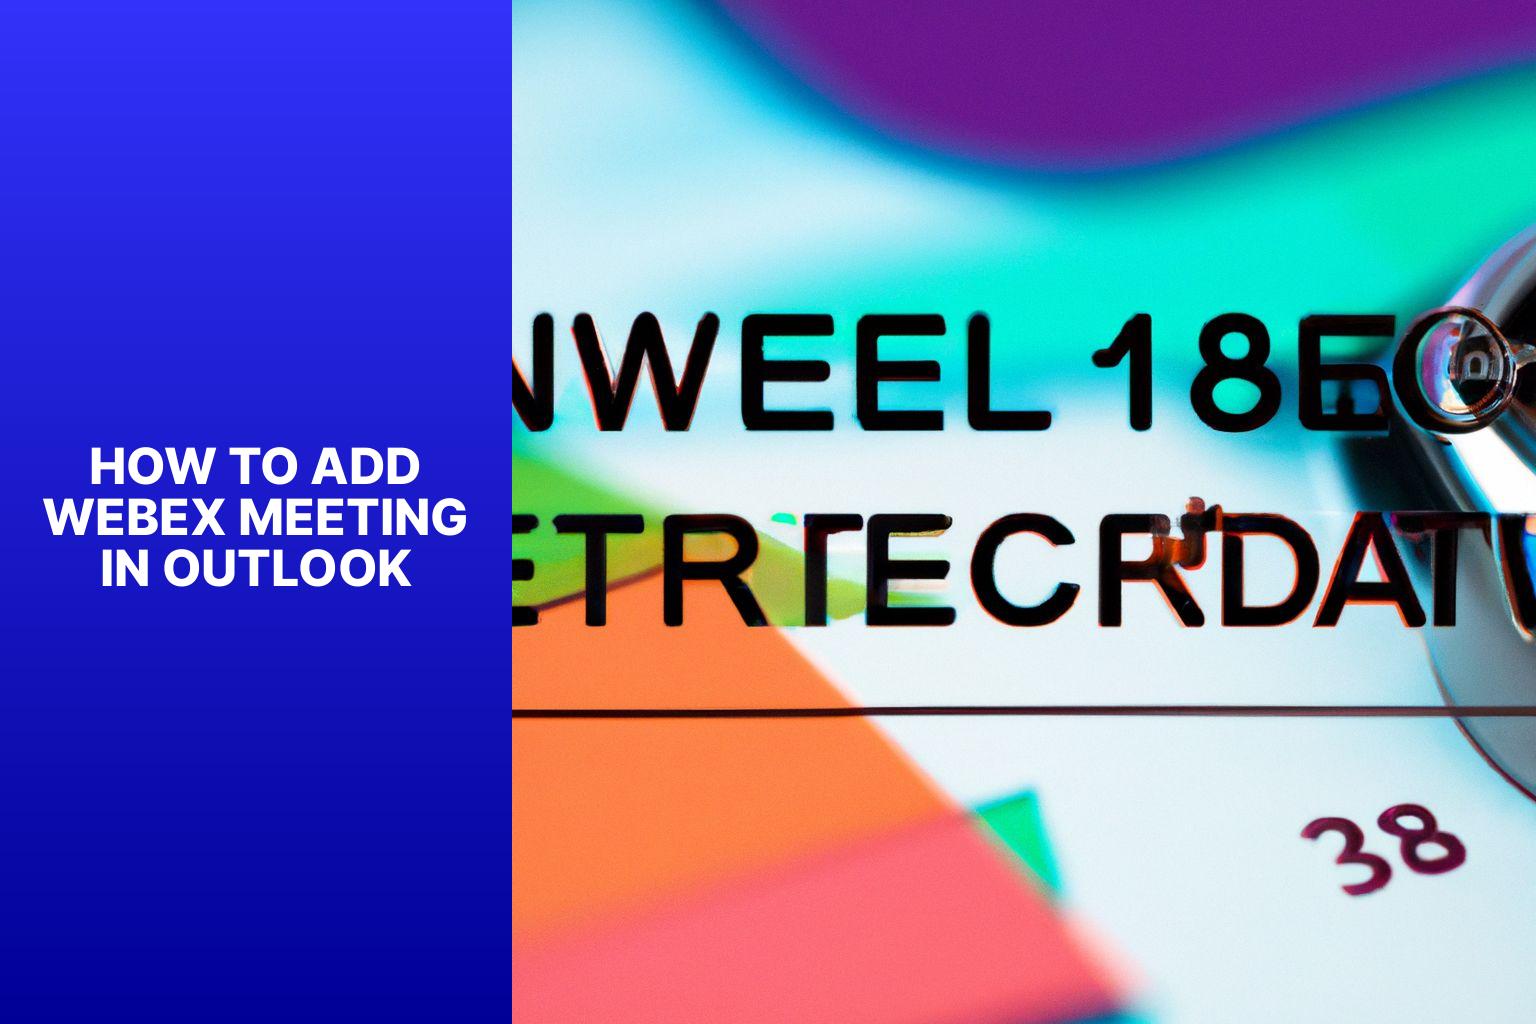 Step-by-Step Guide: How to Add Webex Meeting in Outlook